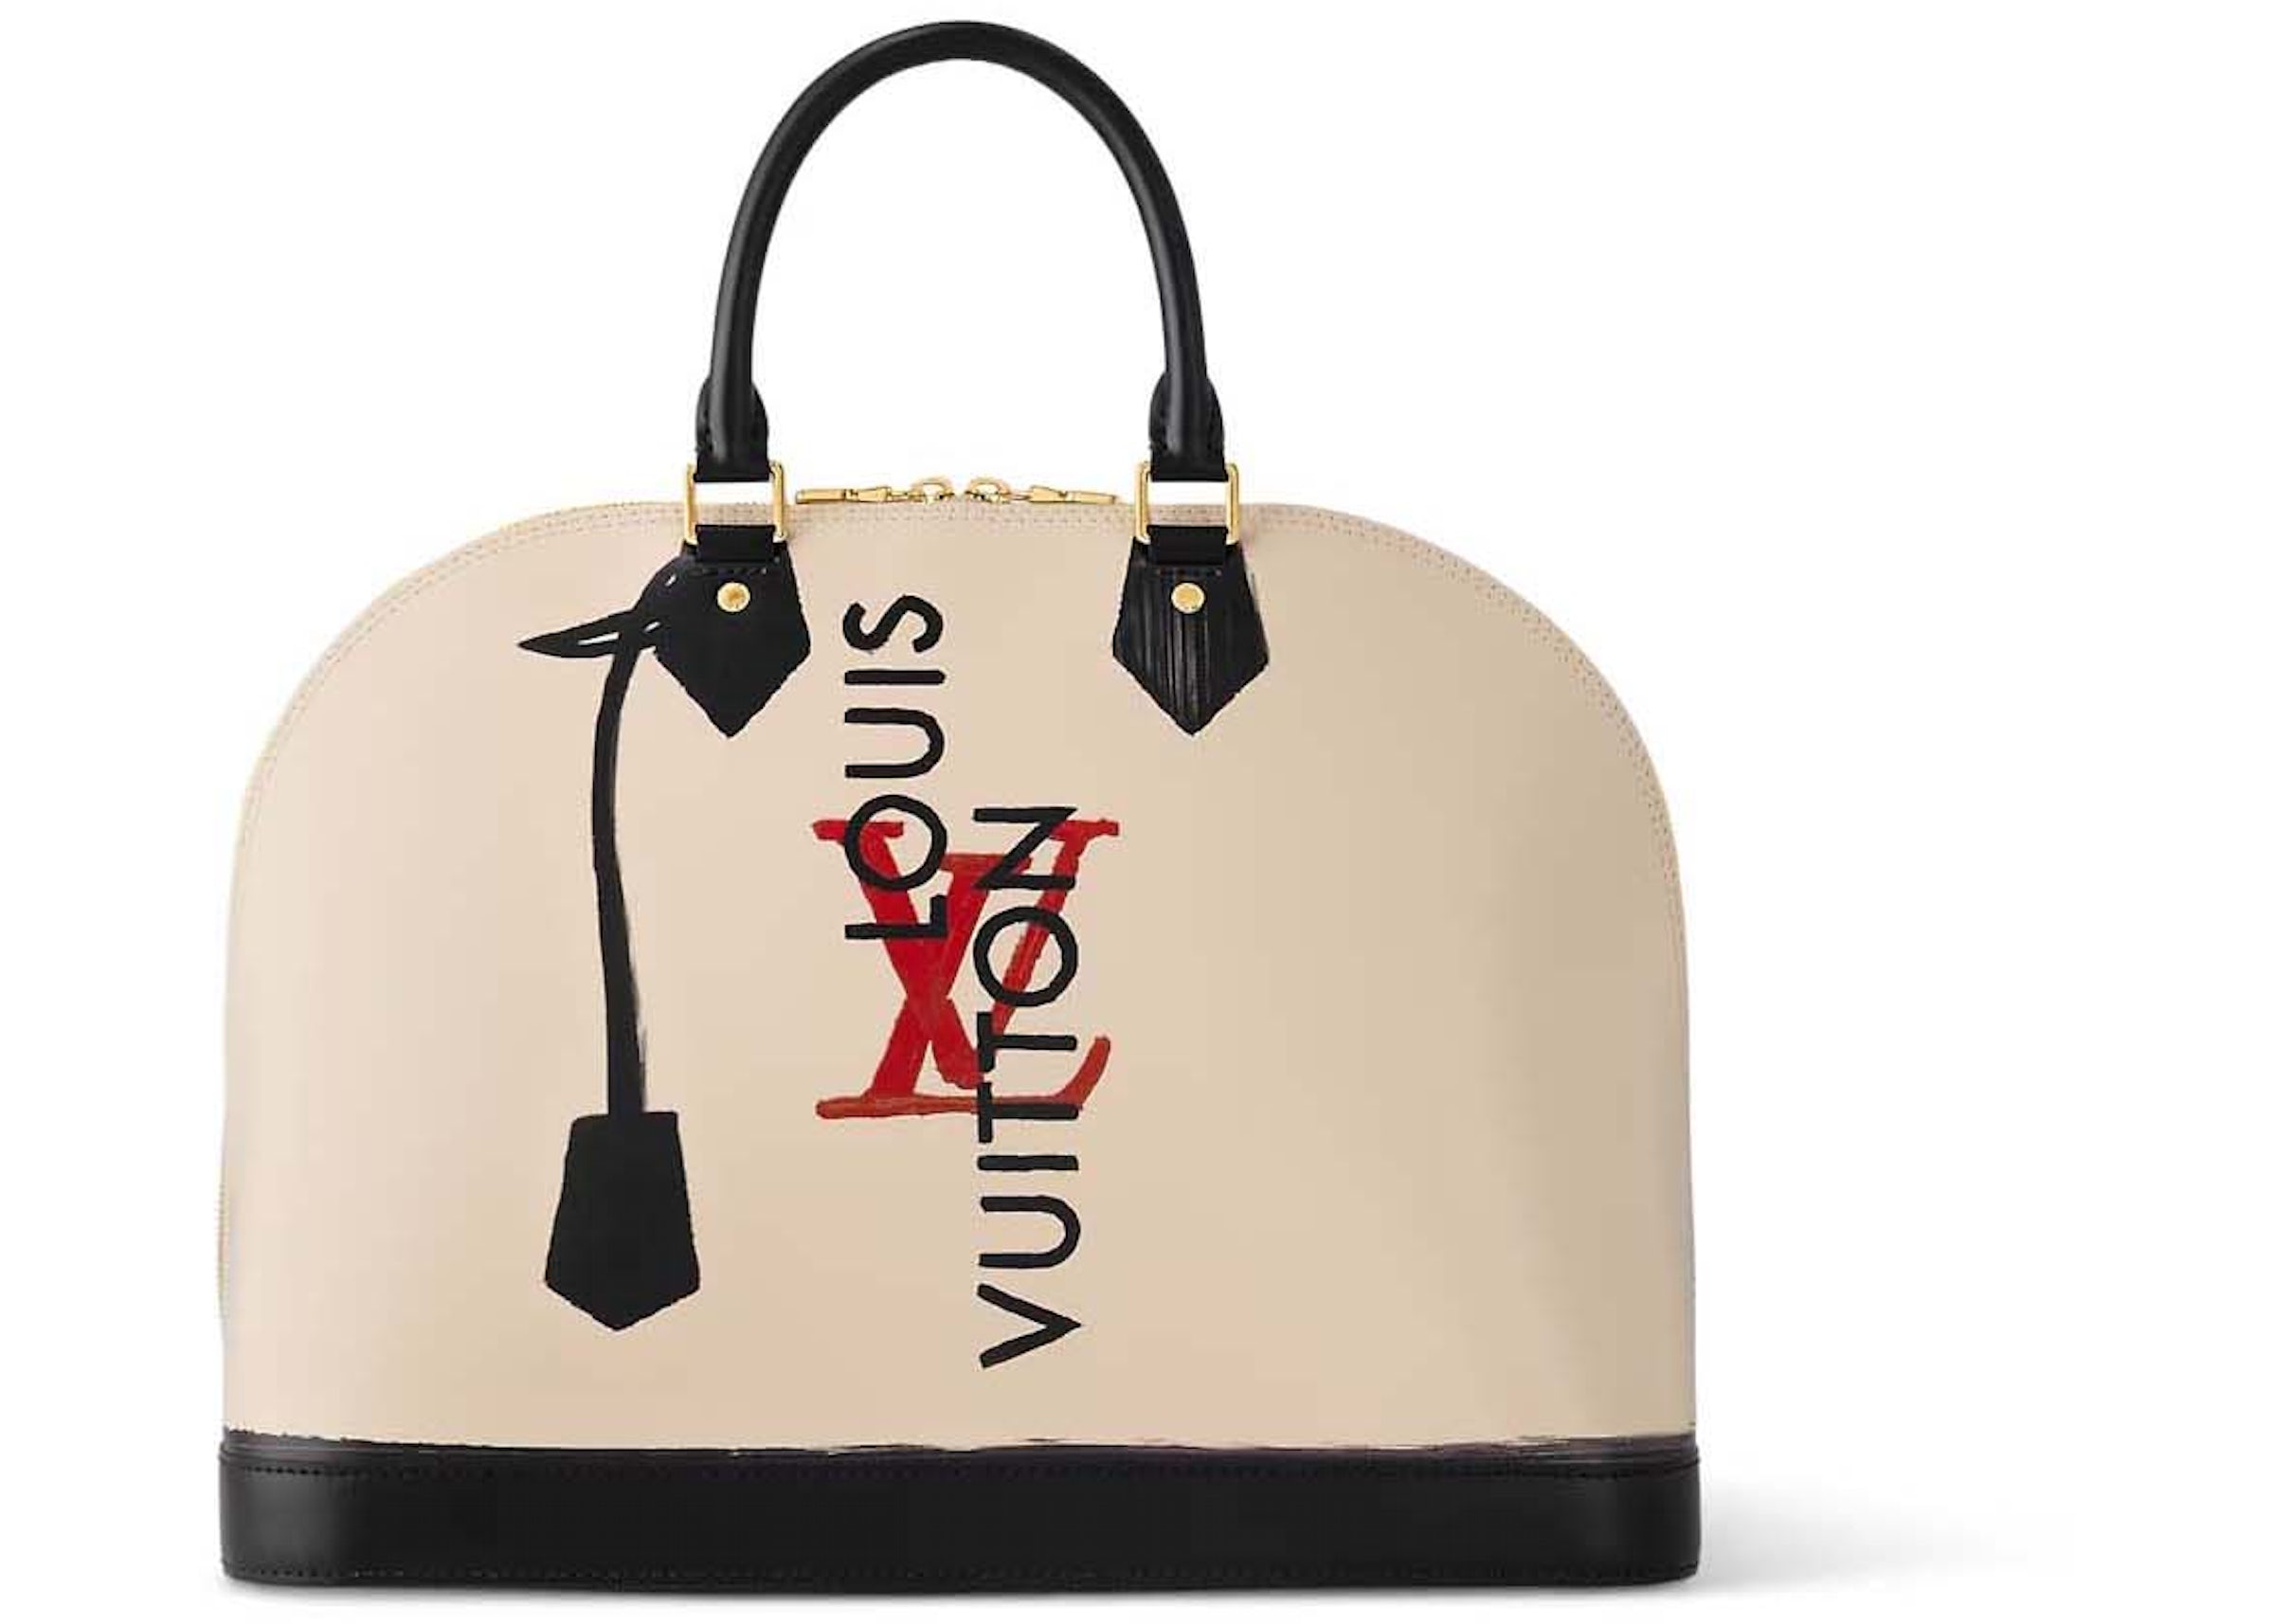 Louis Vuitton Alma BB in Limited Edition DA - Review, Wear & Tear + What  Fits Inside! 